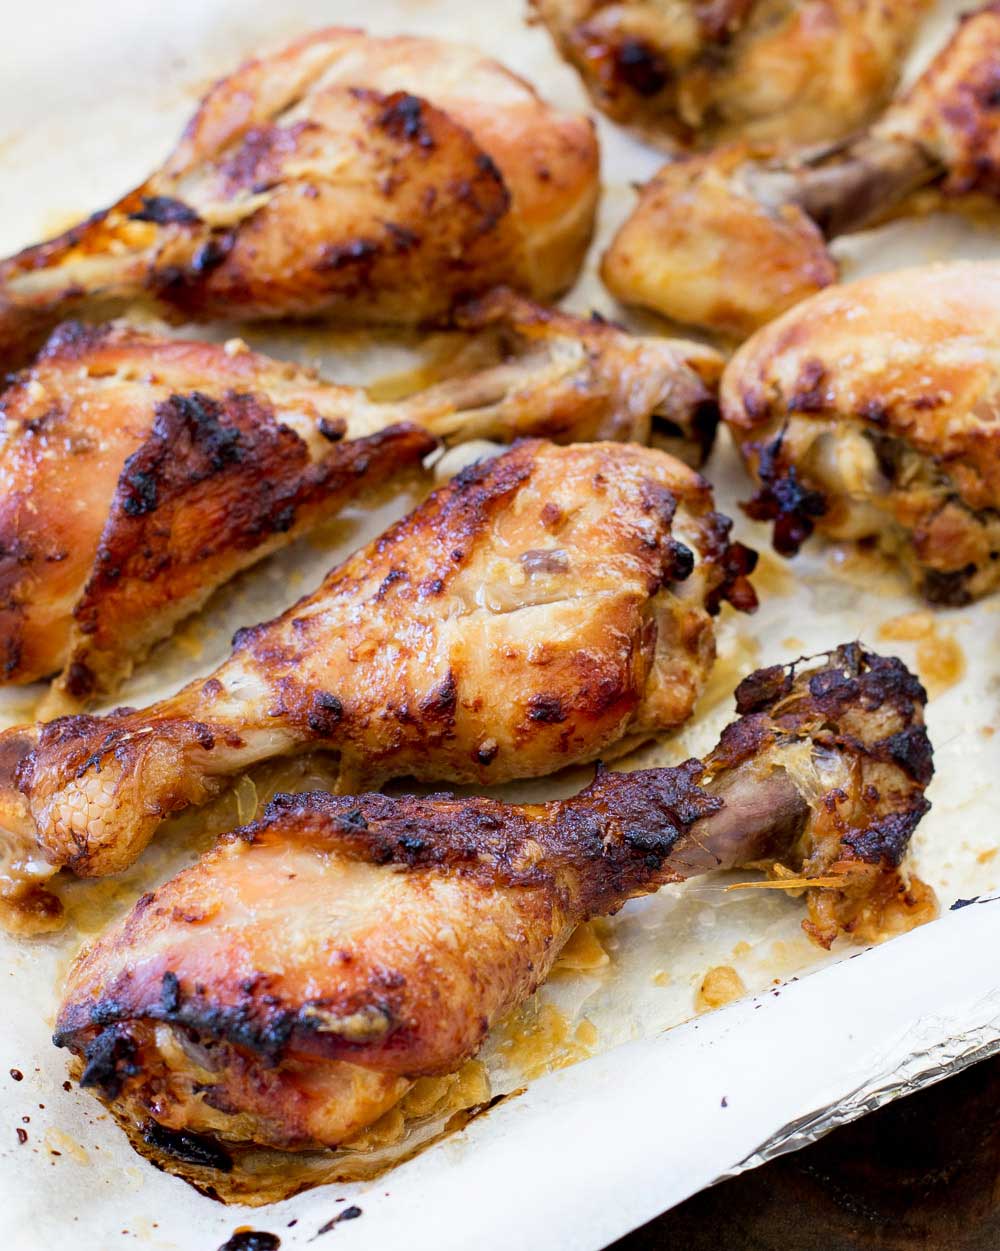 Baking tray with baked chicken drumsticks on it